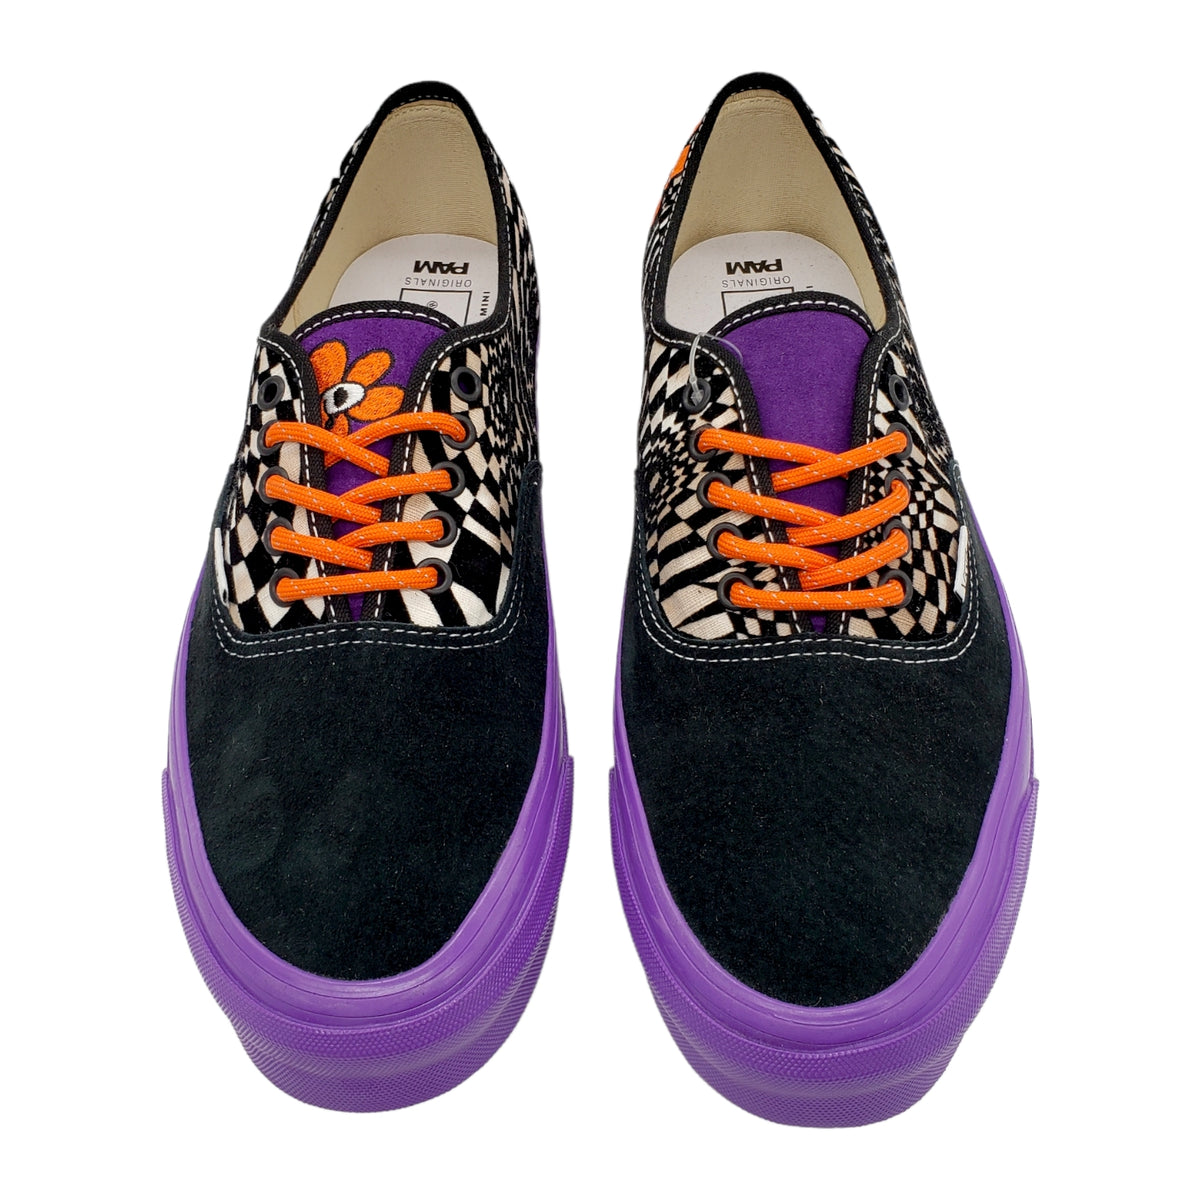 Vans x PAM Black and Purple Suede Trainers